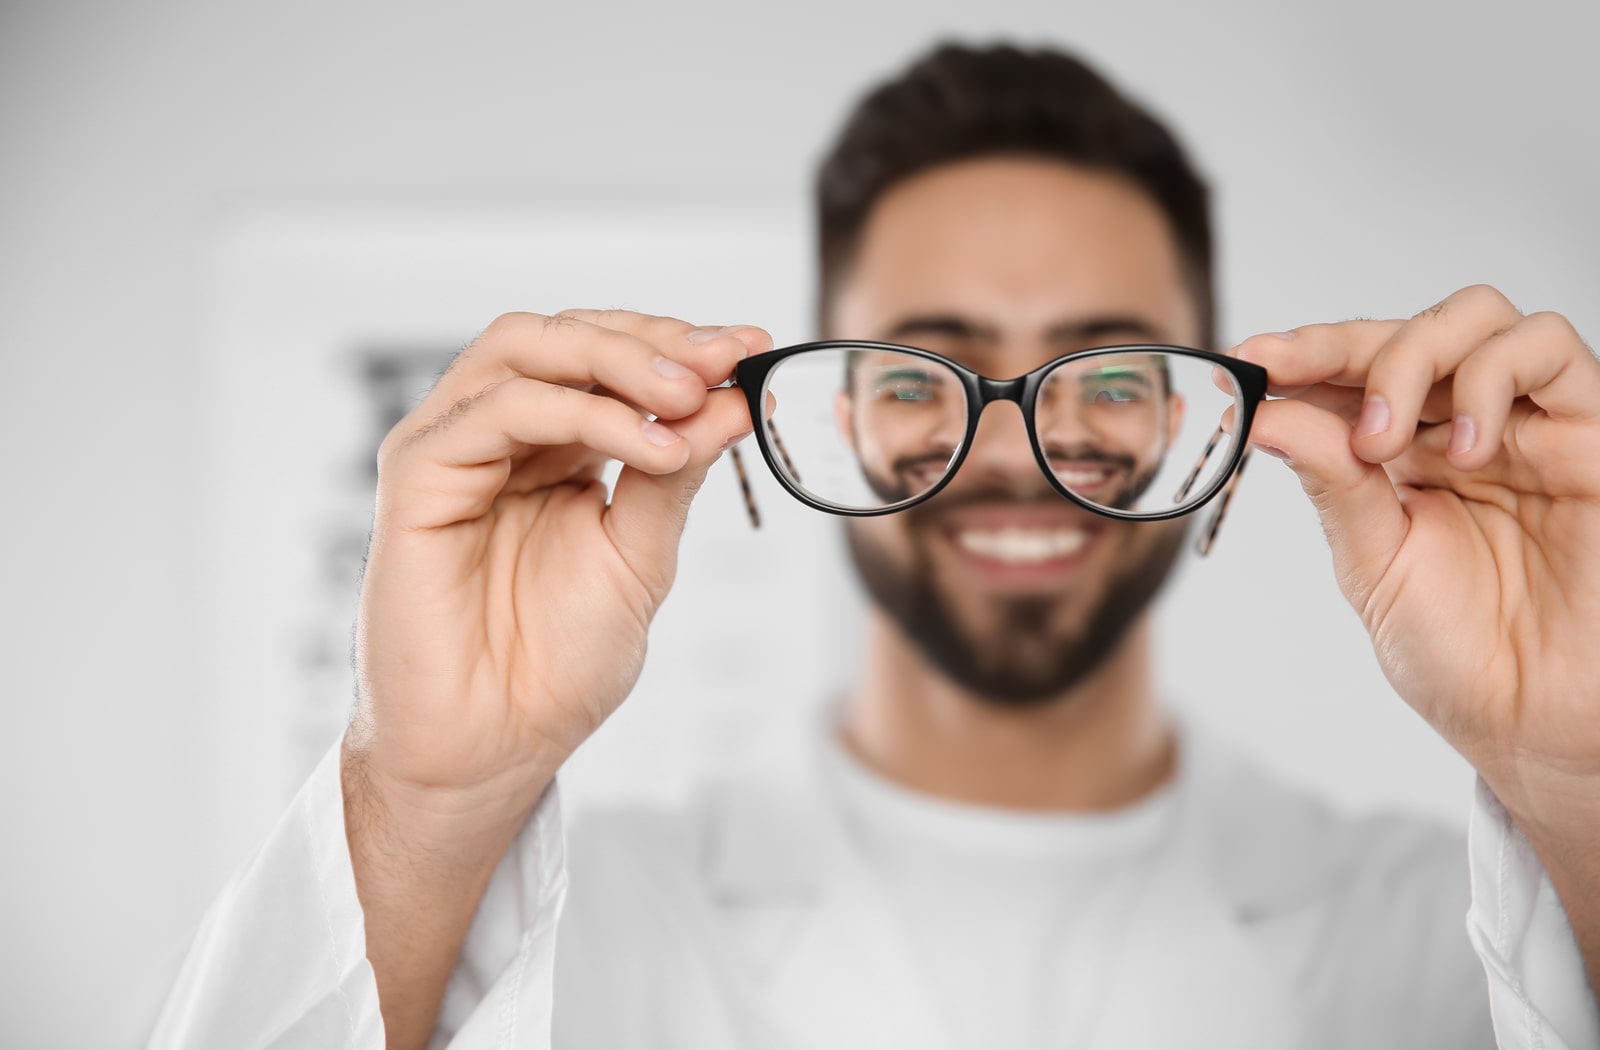 A man holding a pair of glasses in front of him, mimicking what myopia looks like.